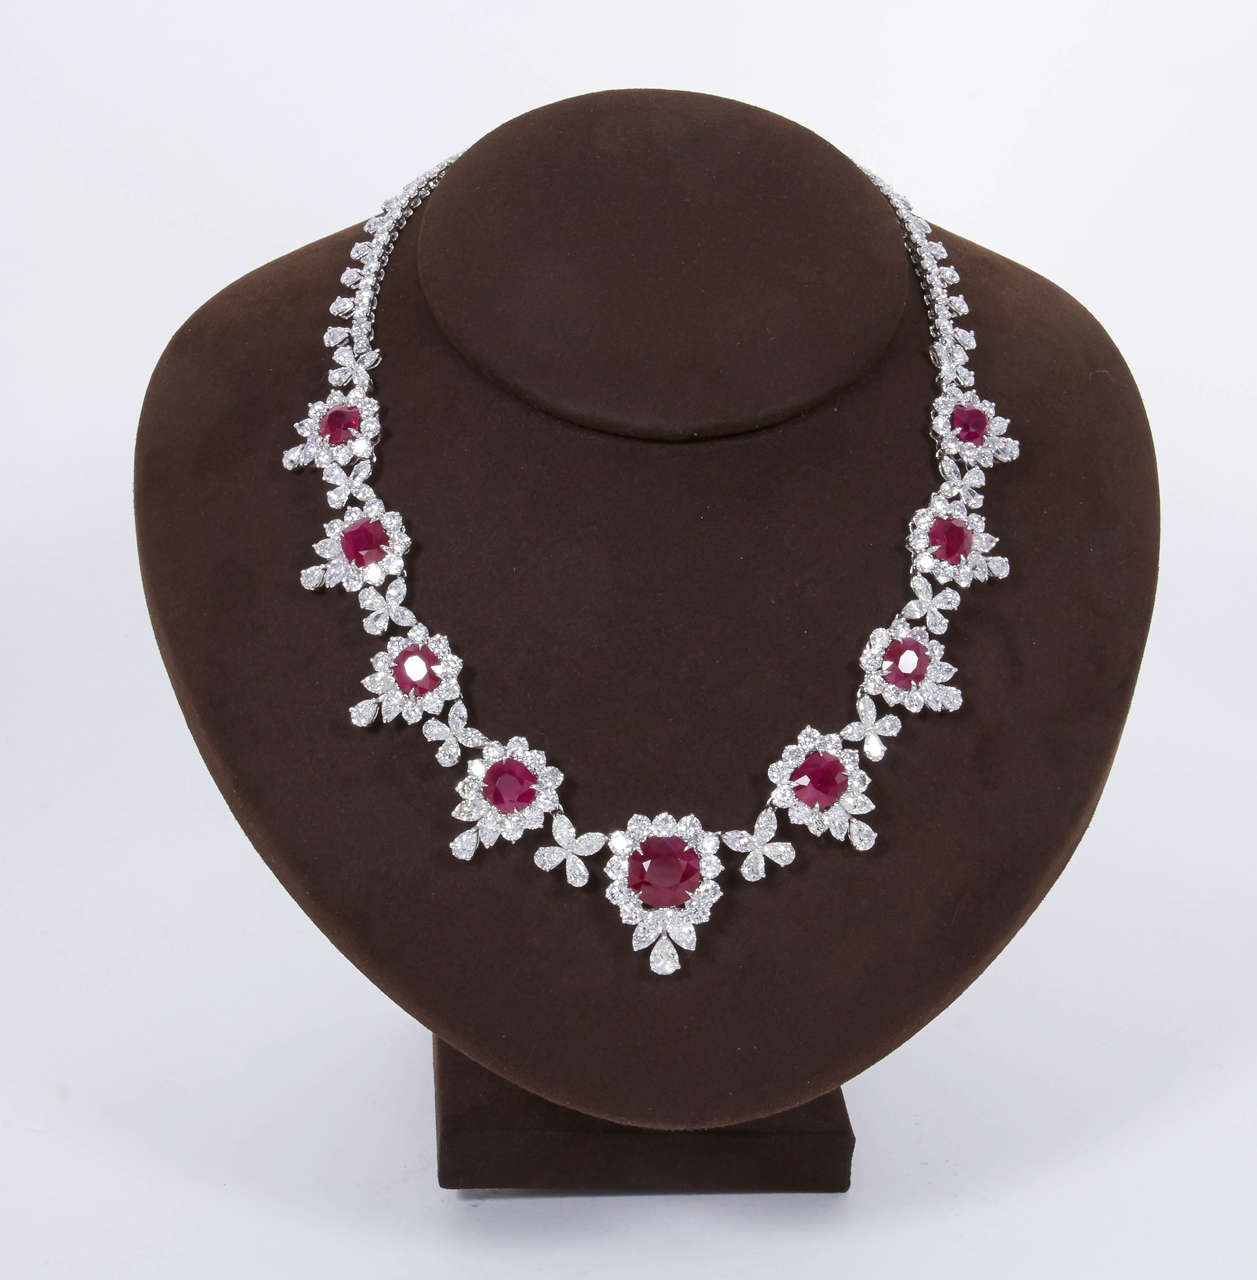 A one of a kind piece featuring beautiful rubies!

Over 36 carats of certified Ruby 

Over 46 carats of diamonds all handmade in New York and set in platinum.

This is an AMAZING piece to add to any collection.

